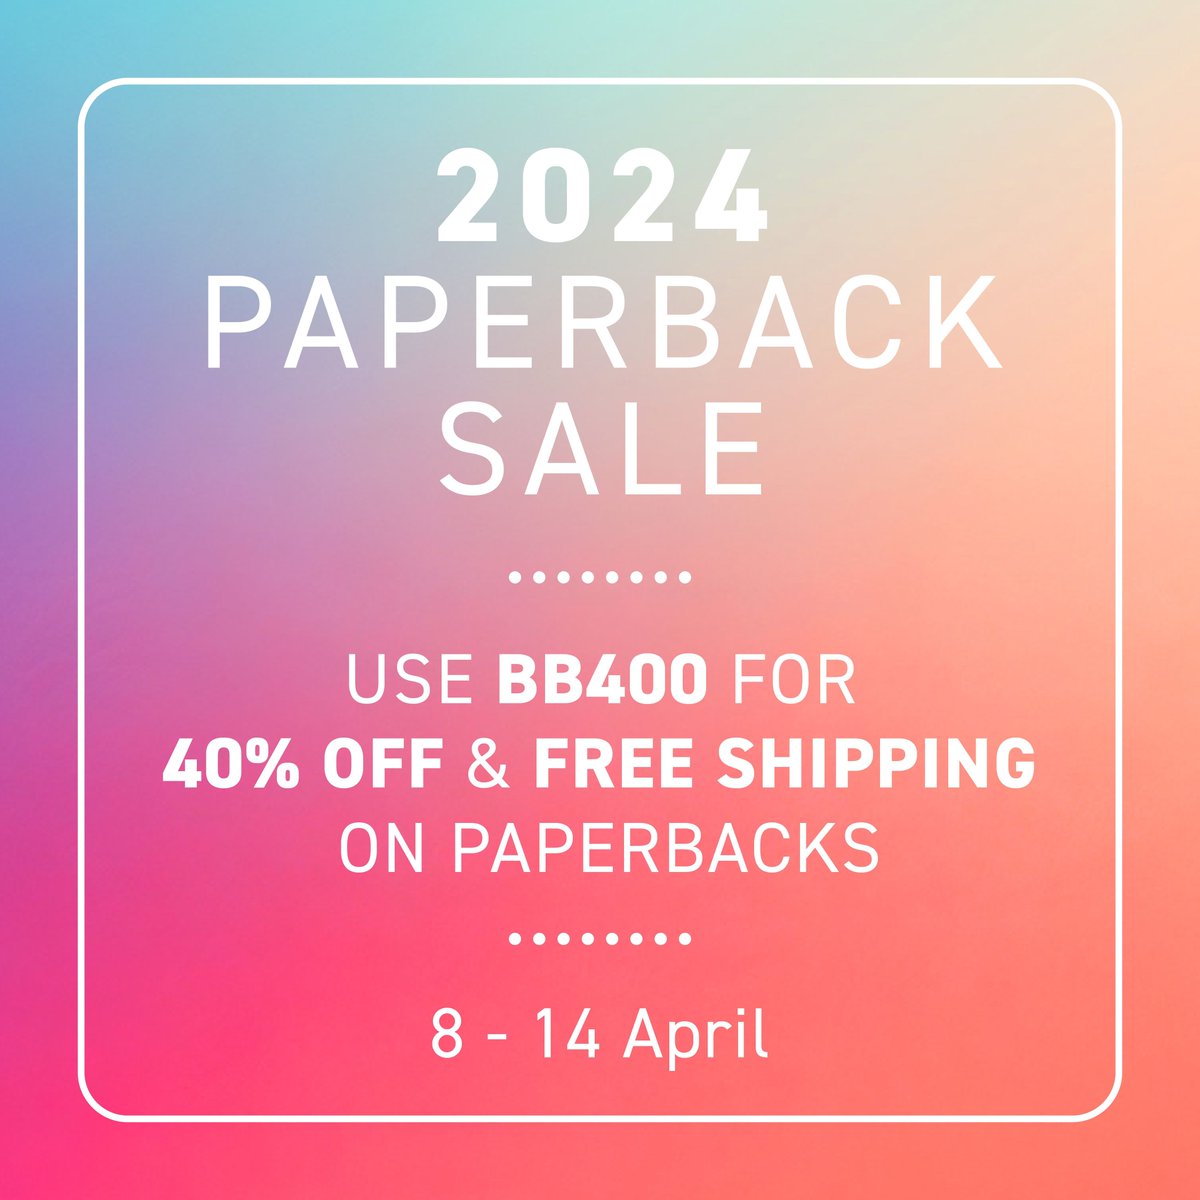 Have you checked out our paperback sale yet? The offer ends on Sunday, so what are you waiting for?! Shop the sale here: buff.ly/49fuKDT #BookSale #GermanStudies